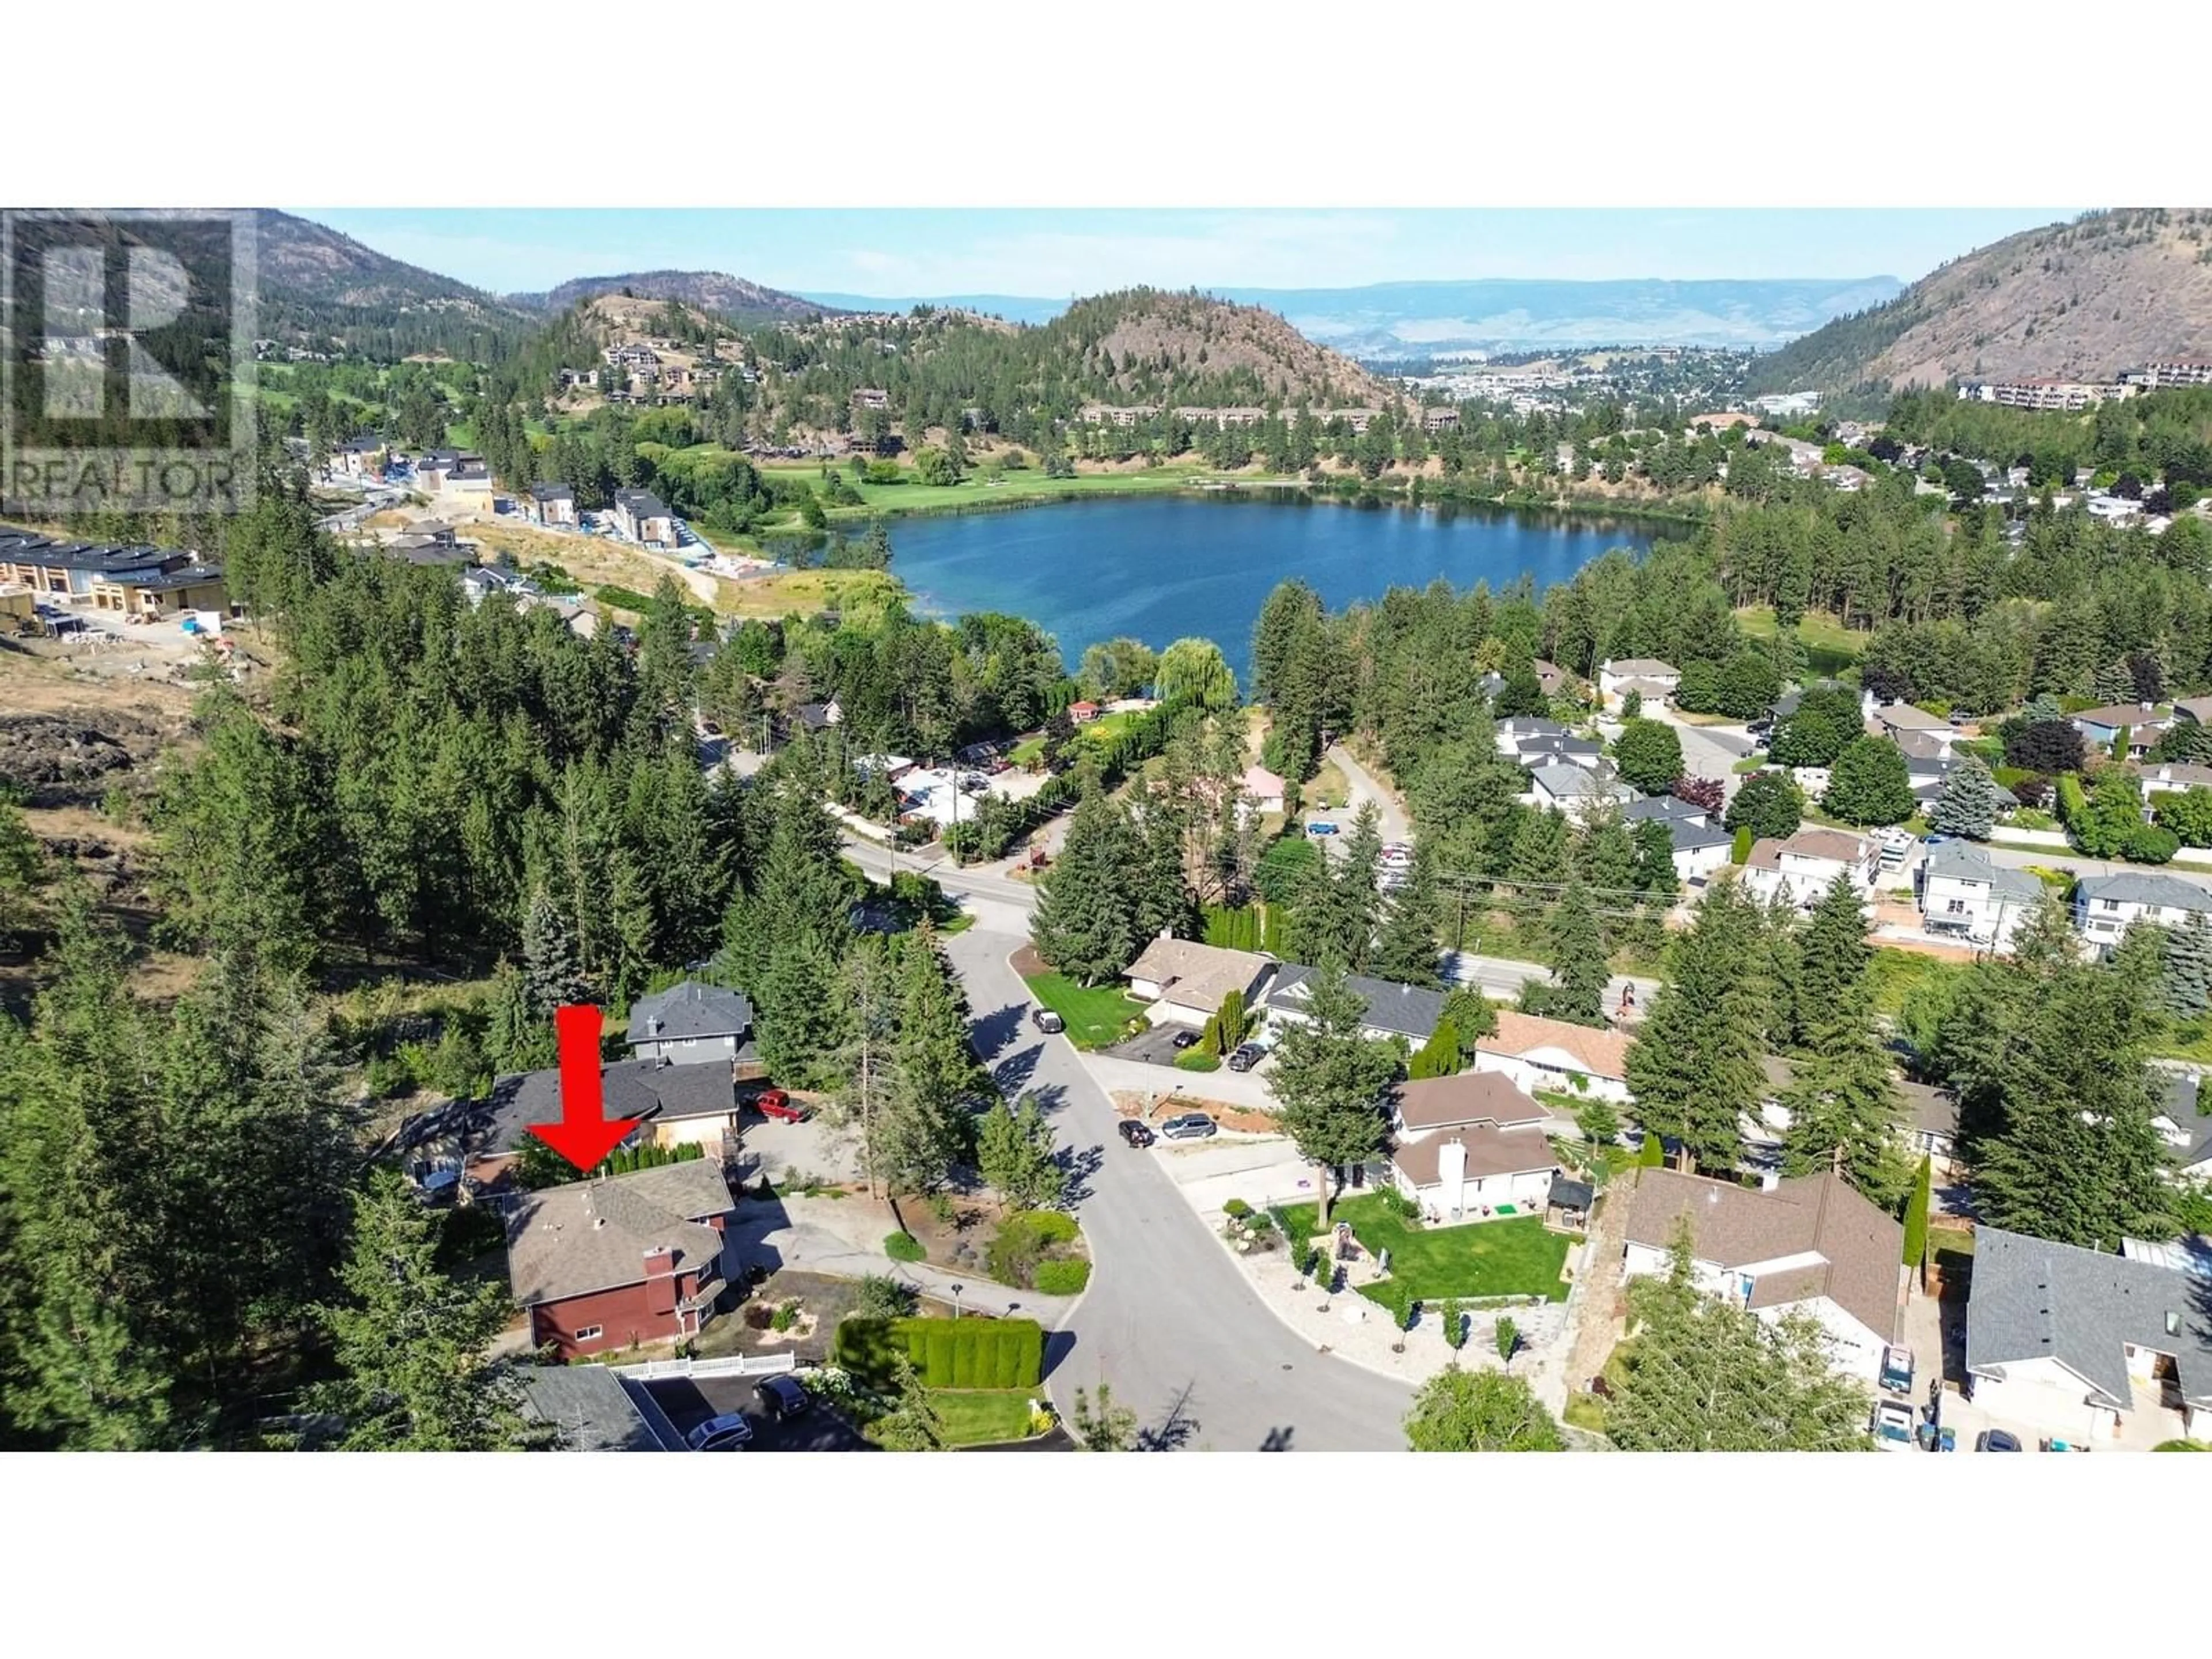 Lakeview for 2458 Alexandria Way, West Kelowna British Columbia V4T1T6